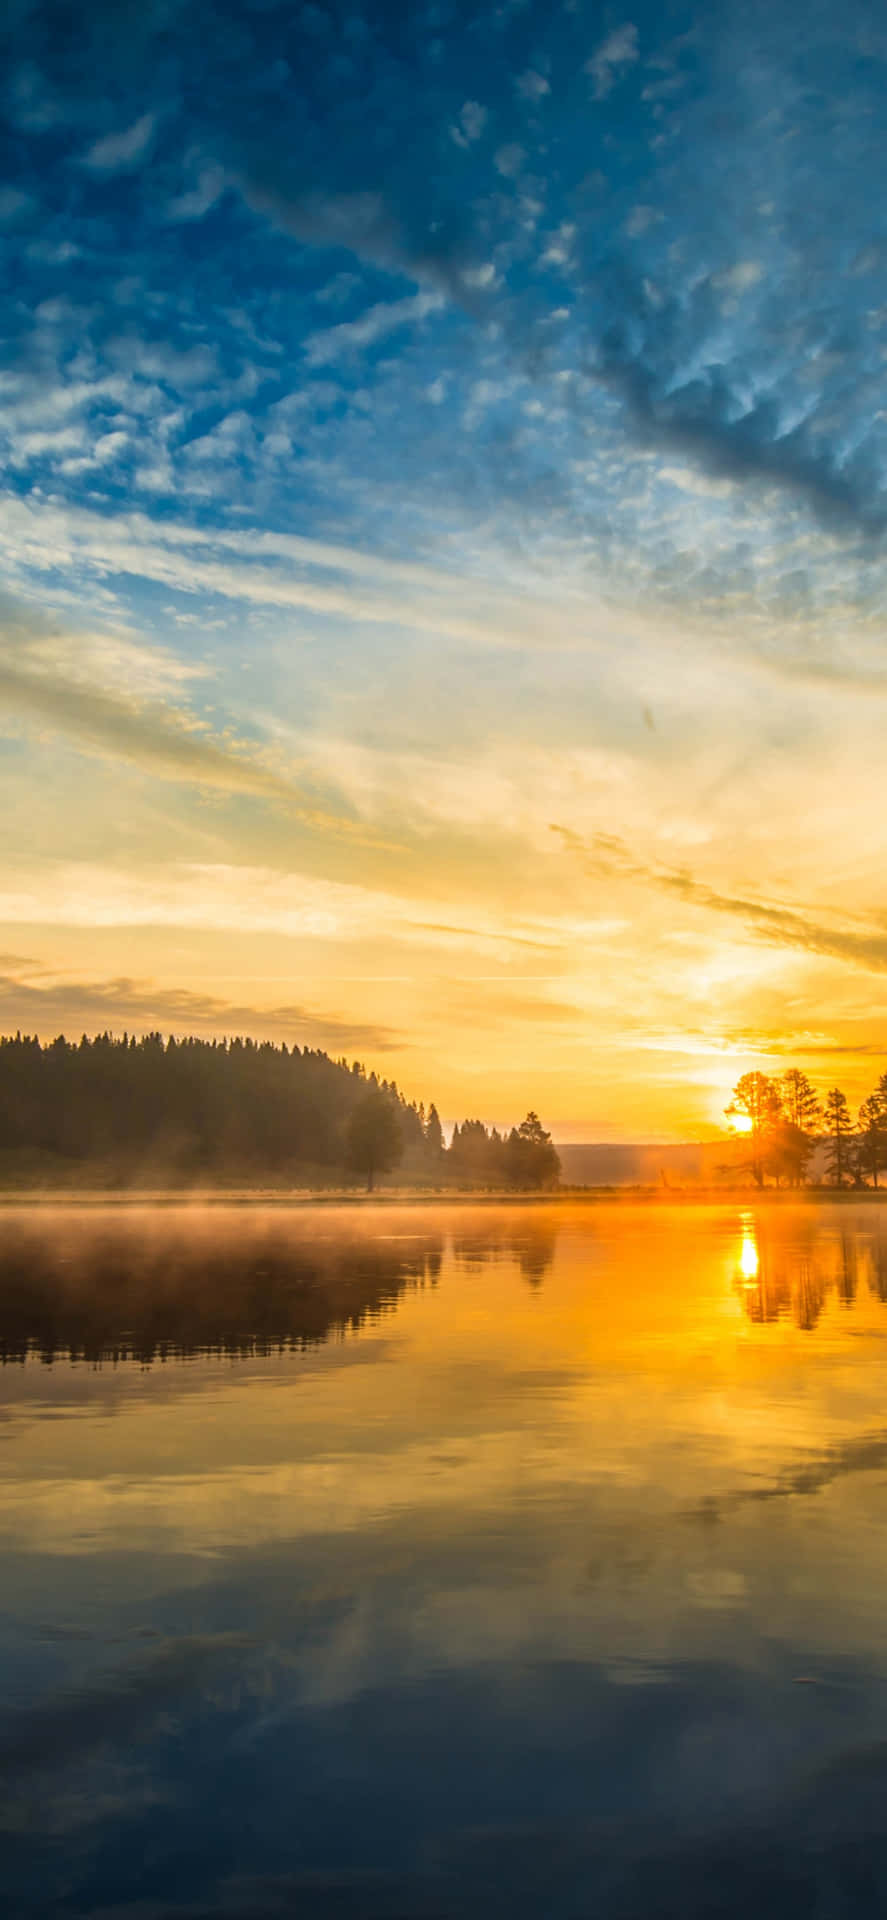 Capture the magical moment of sunrise Wallpaper